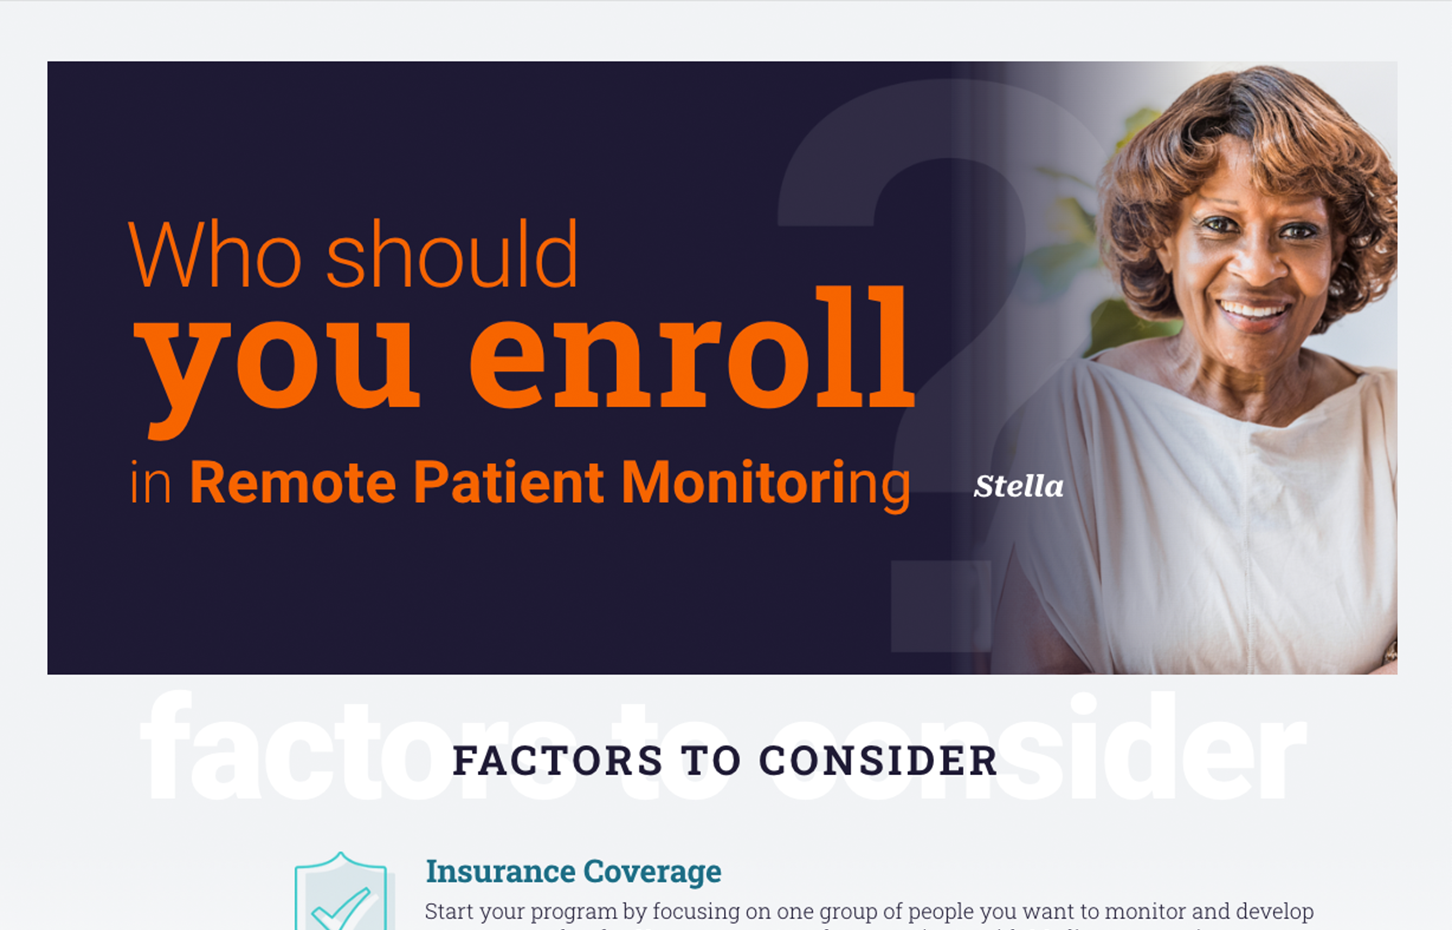 Who Should You Enroll in Remote Patient Monitoring? Factors to consider: Insurance coverage: Start your program by focusing on one group of people you want to monitor and develop a treatment plan for. You may want to choose patients with Medicare as a primary insurer, Medicare as a secondary insurer or commercial health insurance covering RPM. The right circumstances: Other focuses for your program may be patients with two or more chronic conditions, patients with unreliable transportation or living far